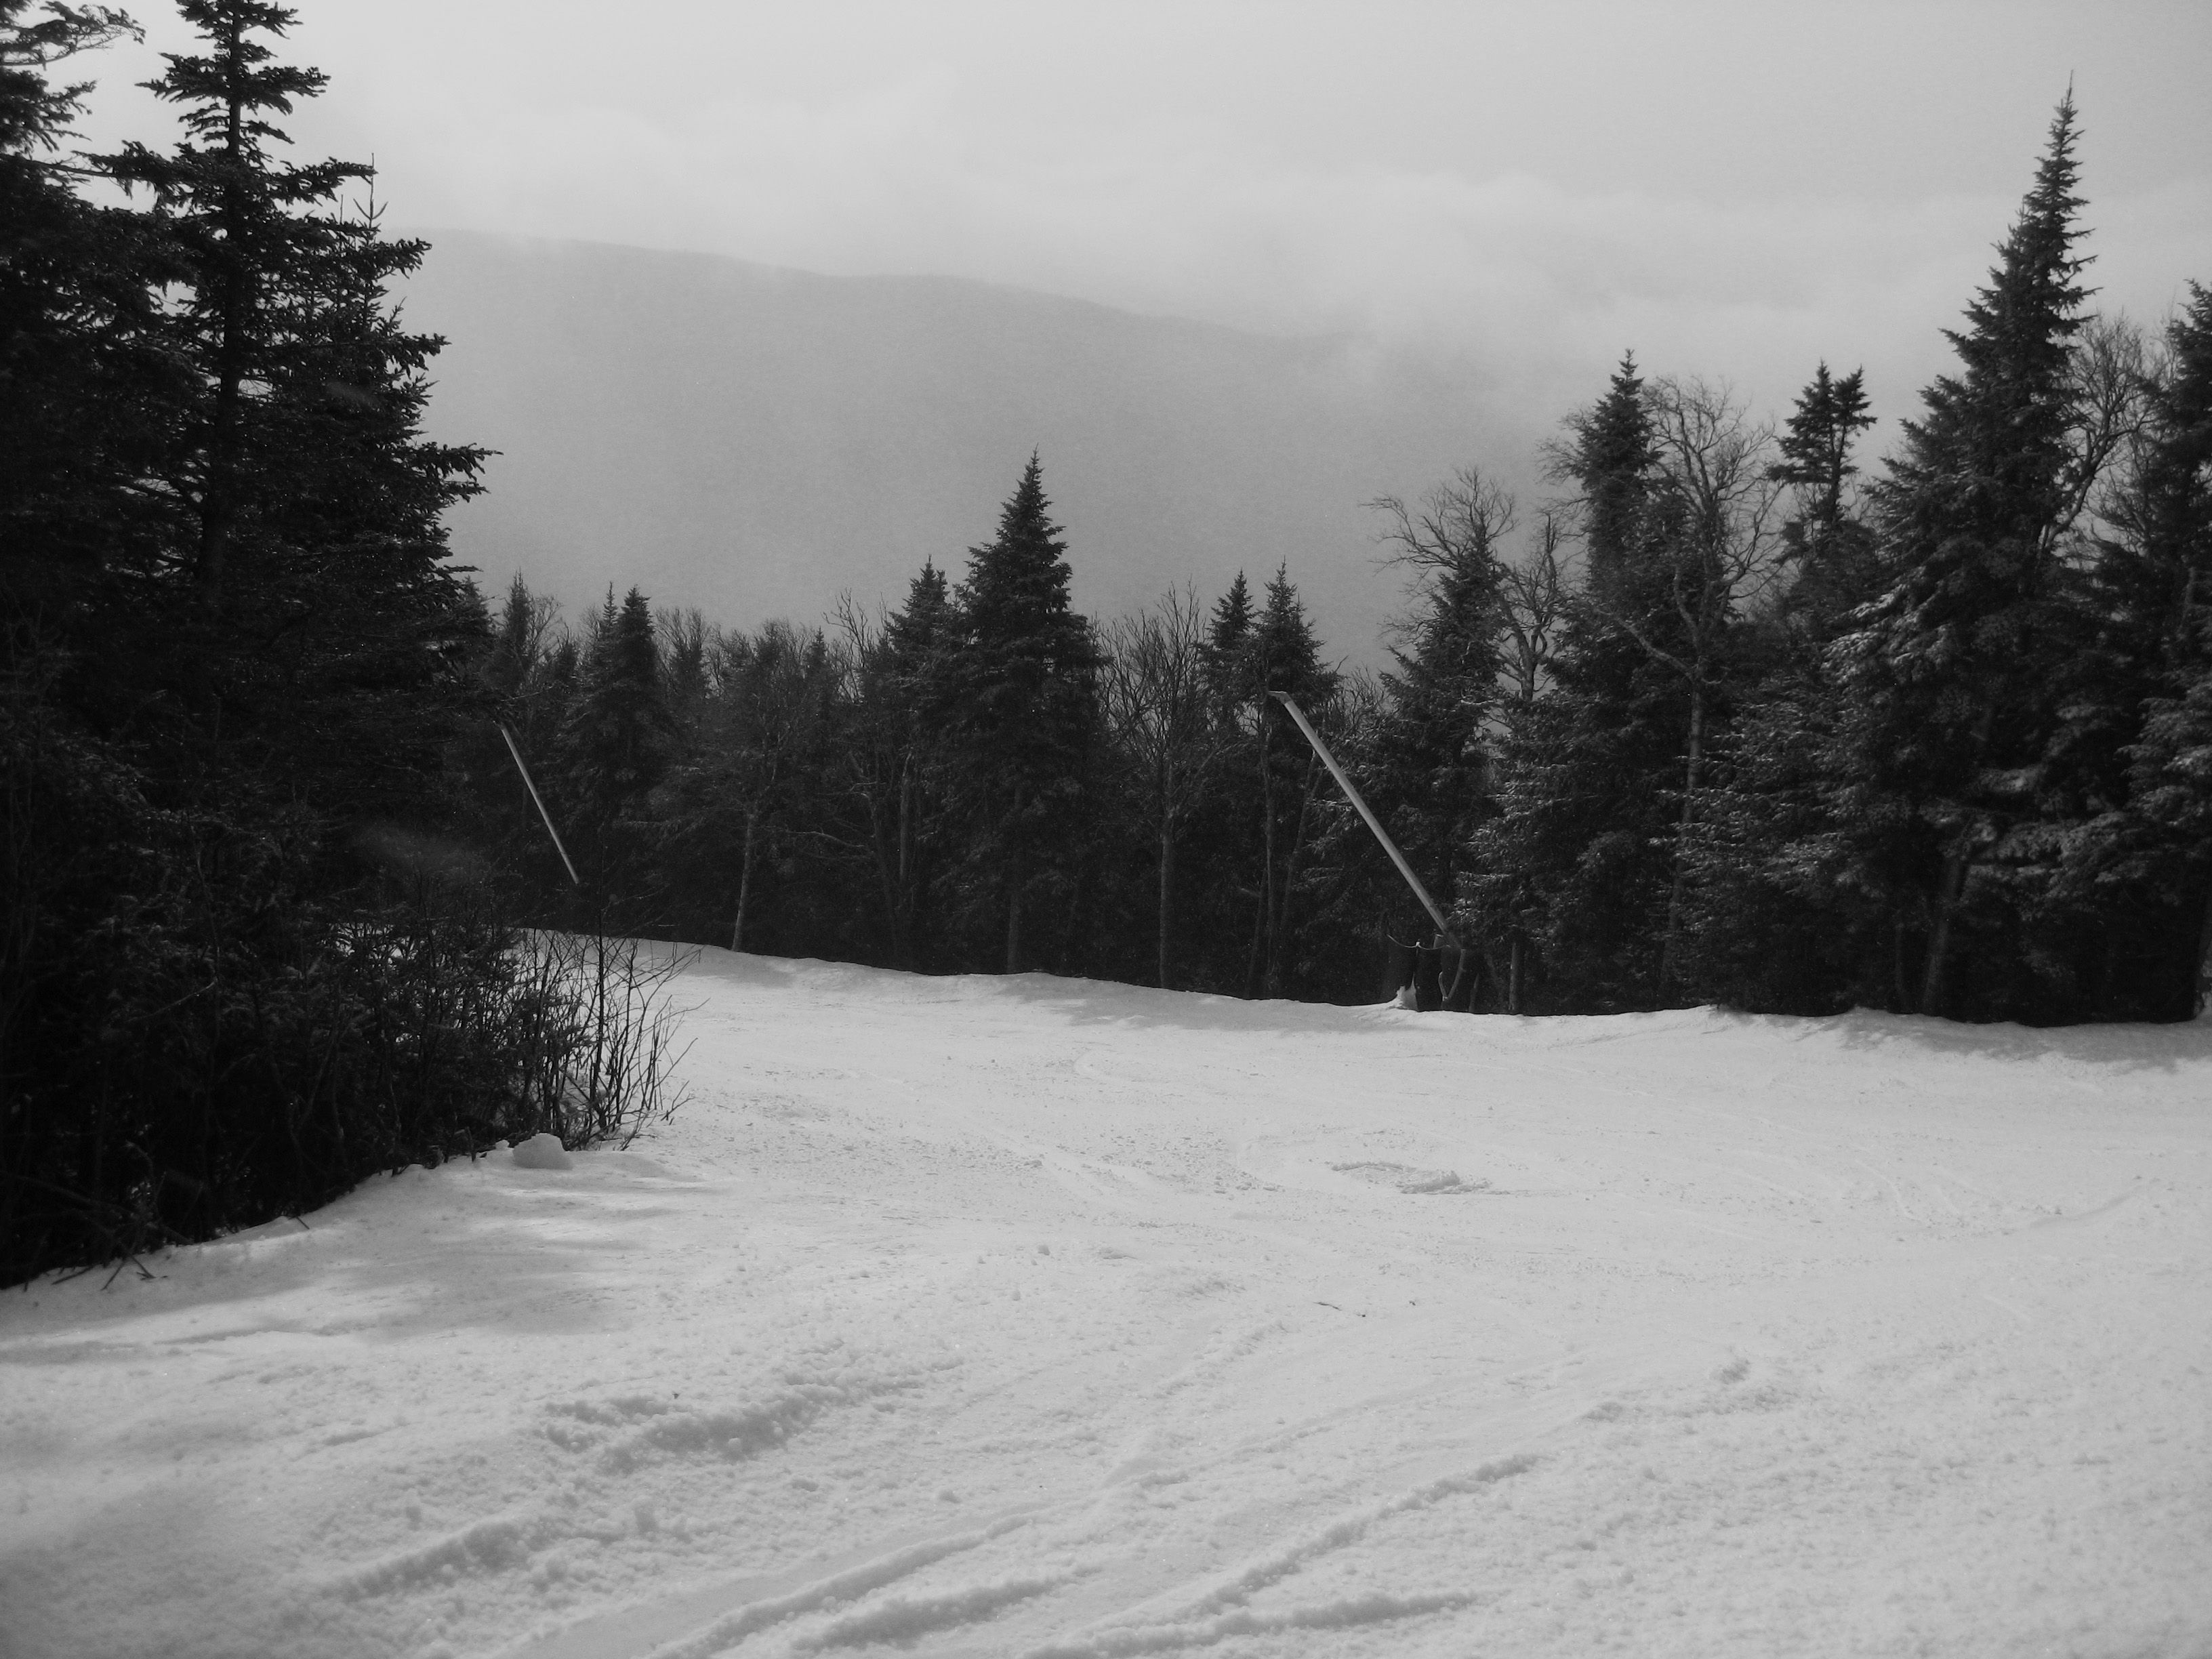 Stowe: Black and White